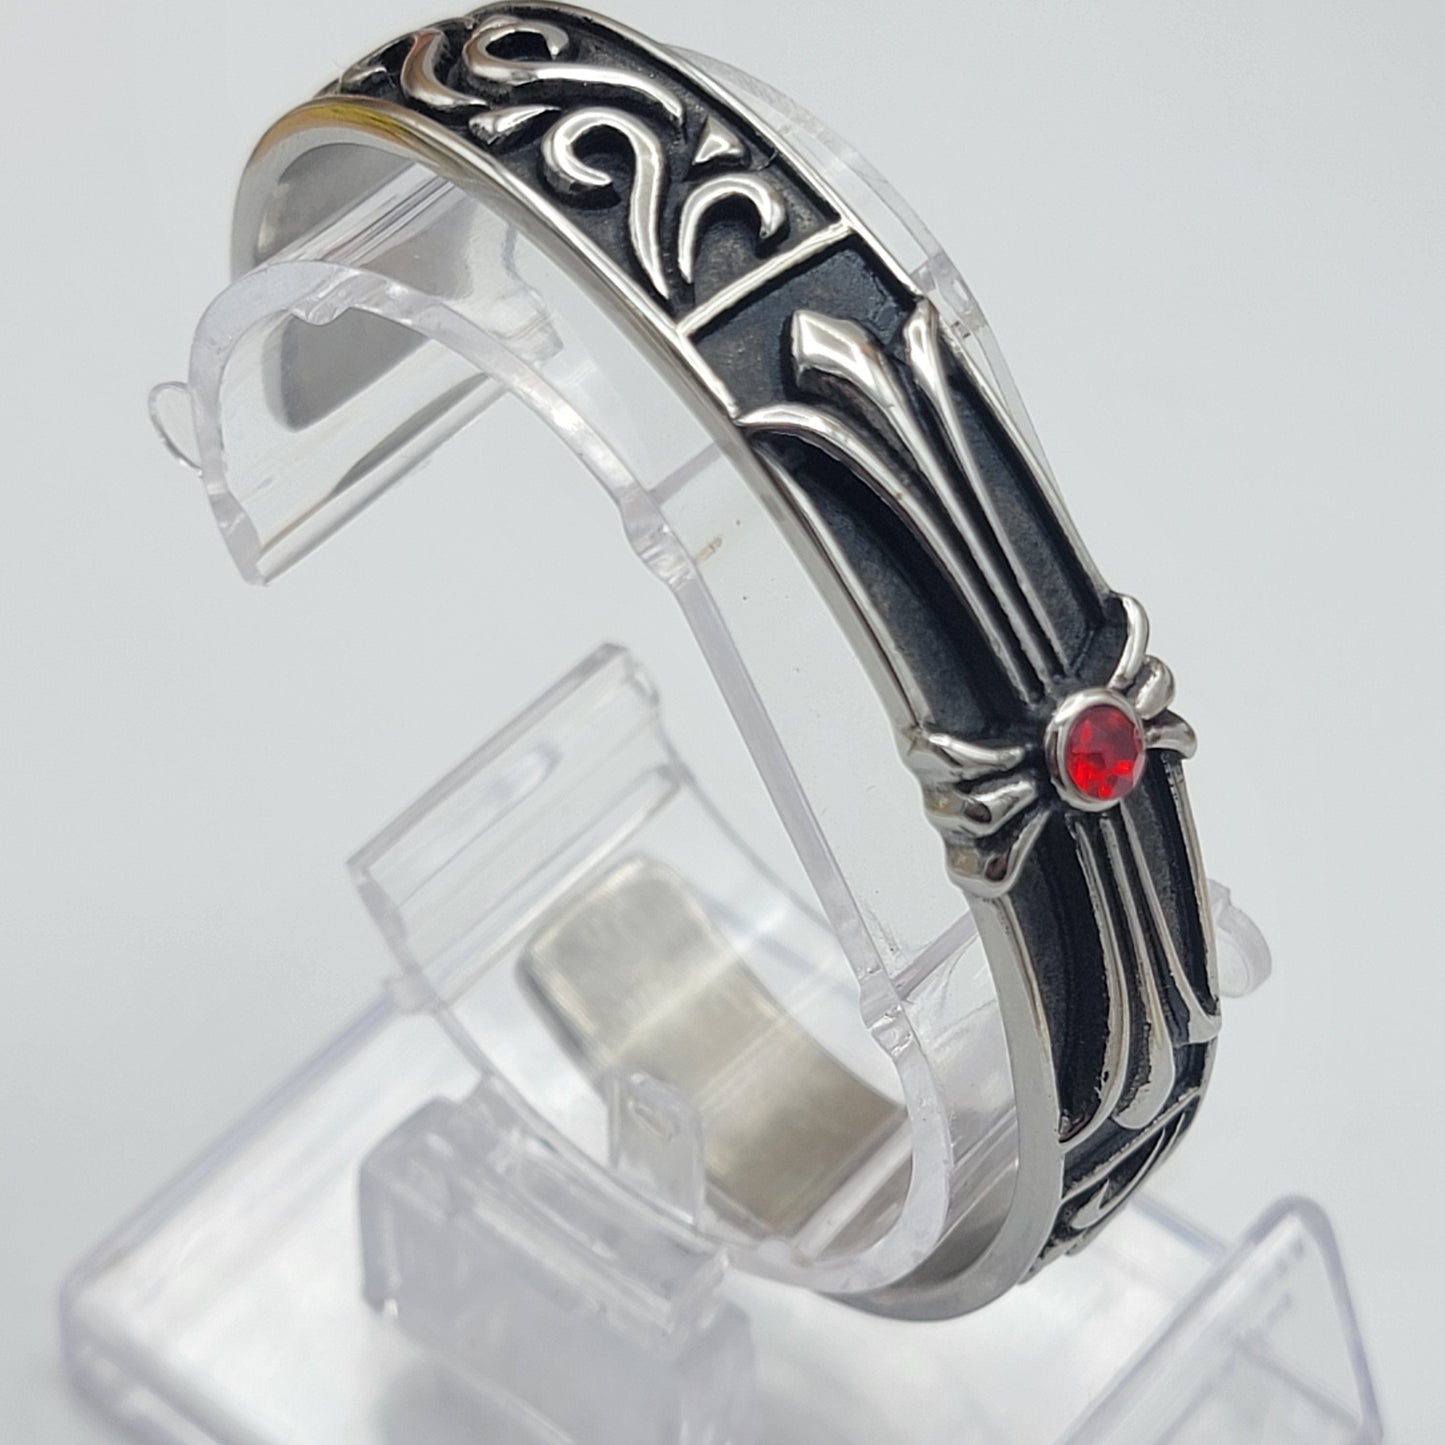 Bangles - Stainless Steel. Black Accents - Cross - Red Crystal.